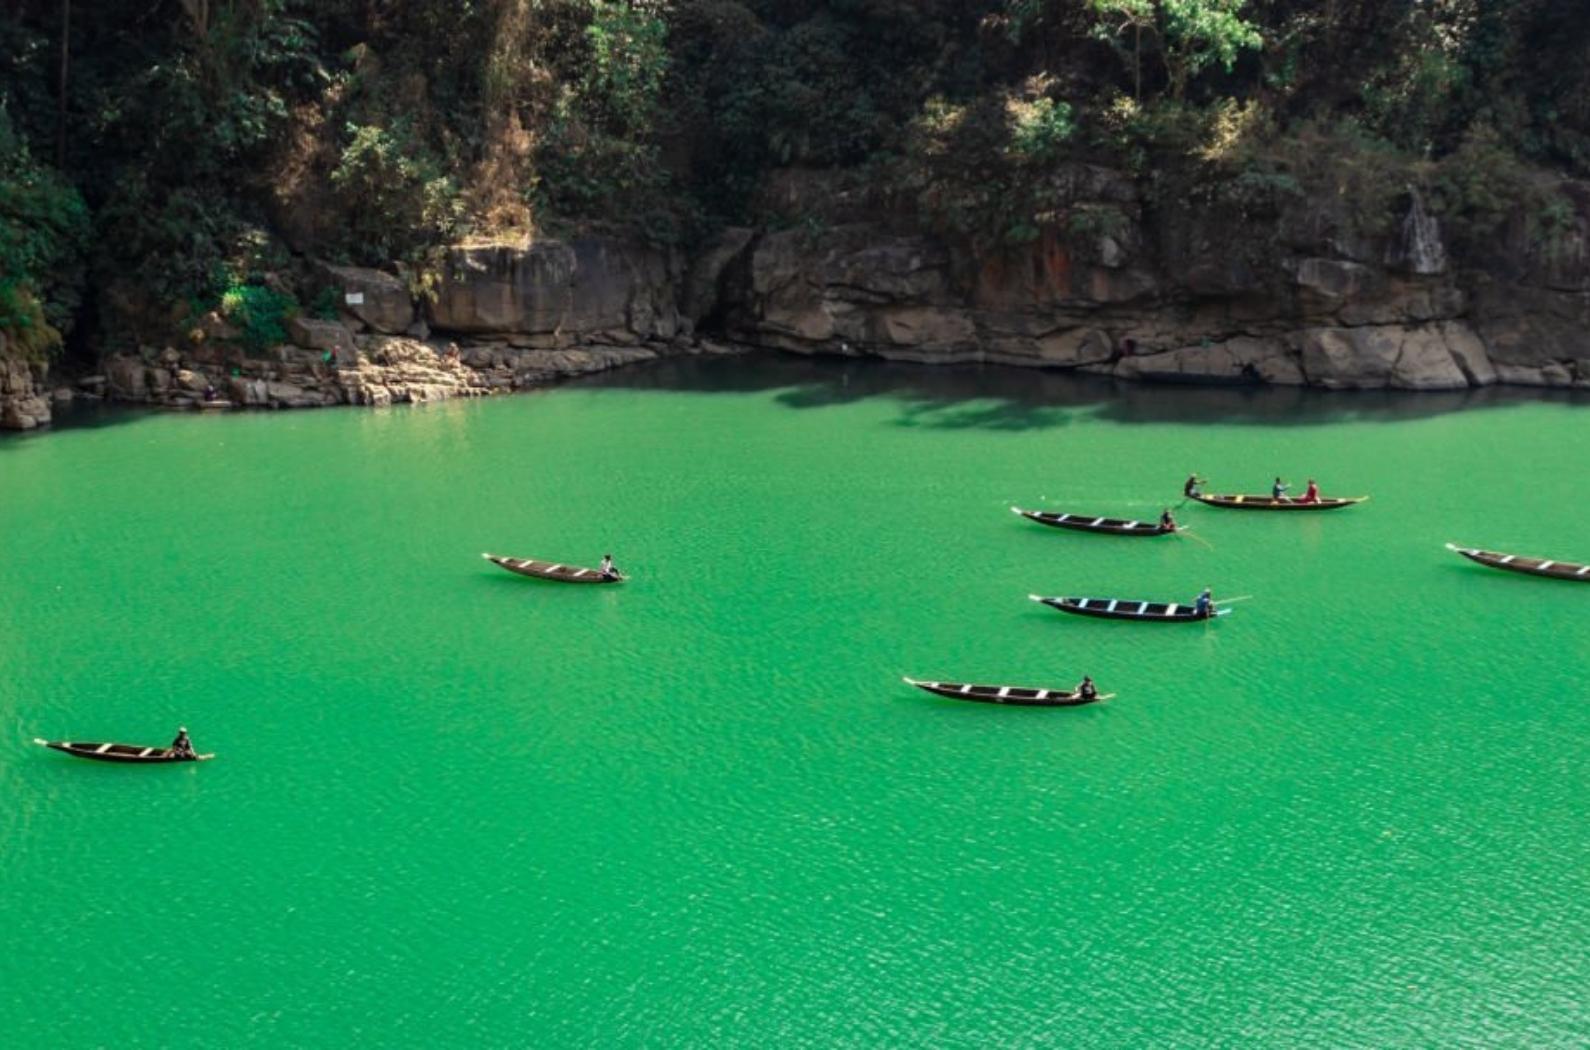 The view of boatsmen riding on their boats in Dawki river in Meghalaya, INDIA.